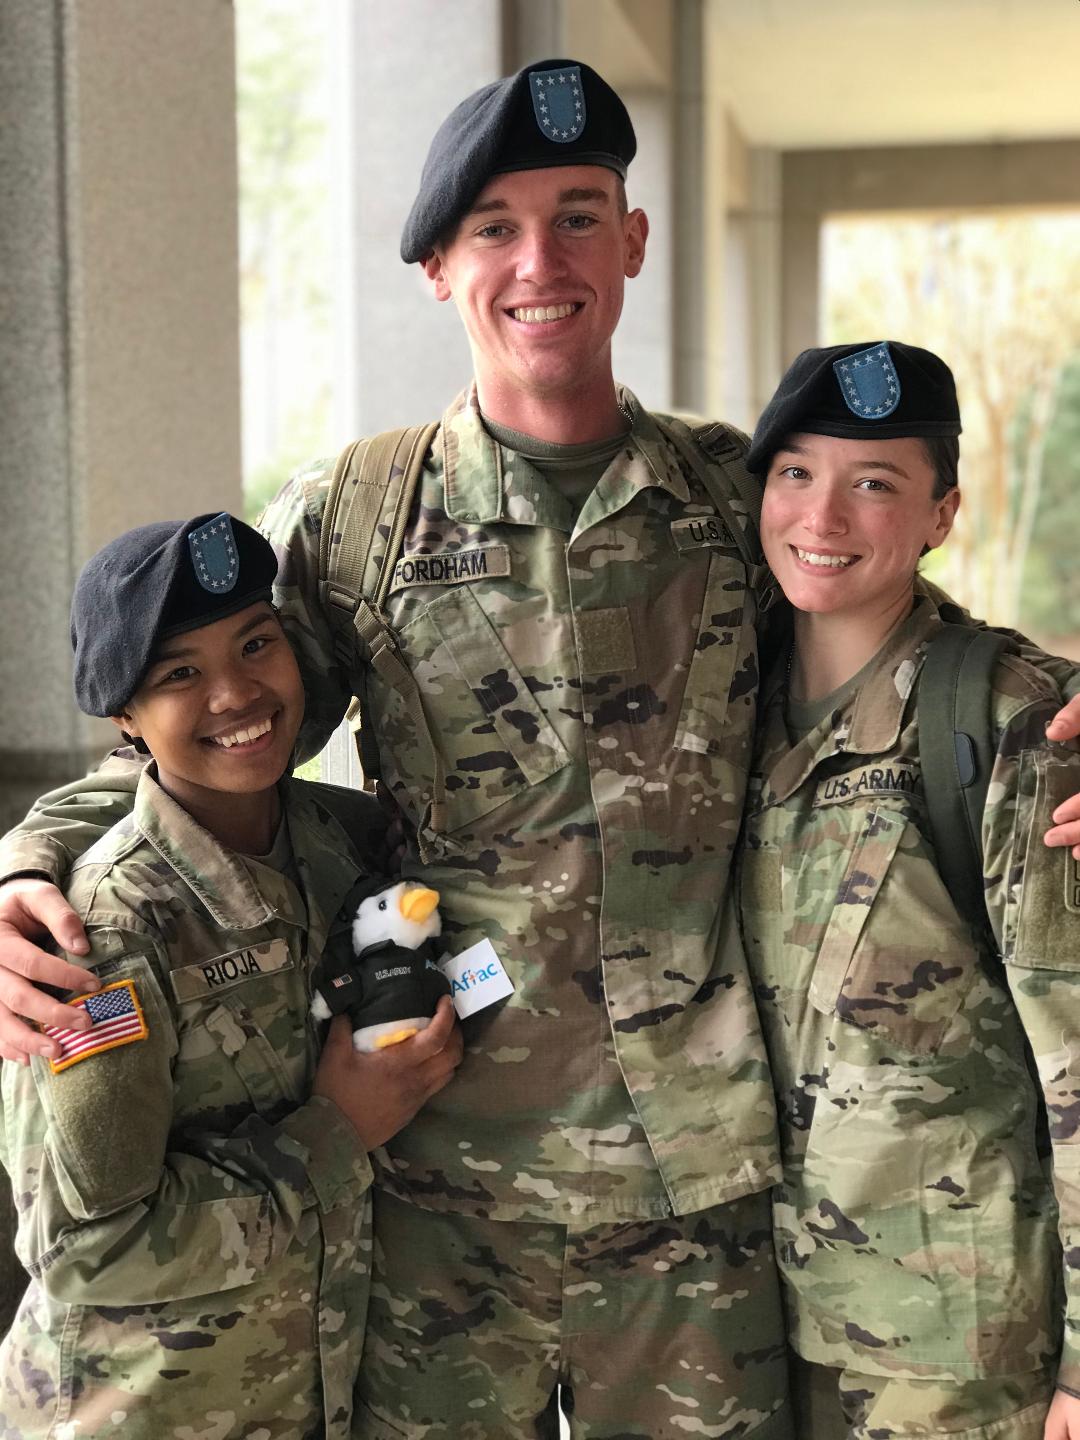 Hannah Mergi at U.S. Army infantry training. She is pictured, right, with privates Fordham from Texas and Rioja from Guam. (Photo courtesy of Melissa Fincher Mergi)